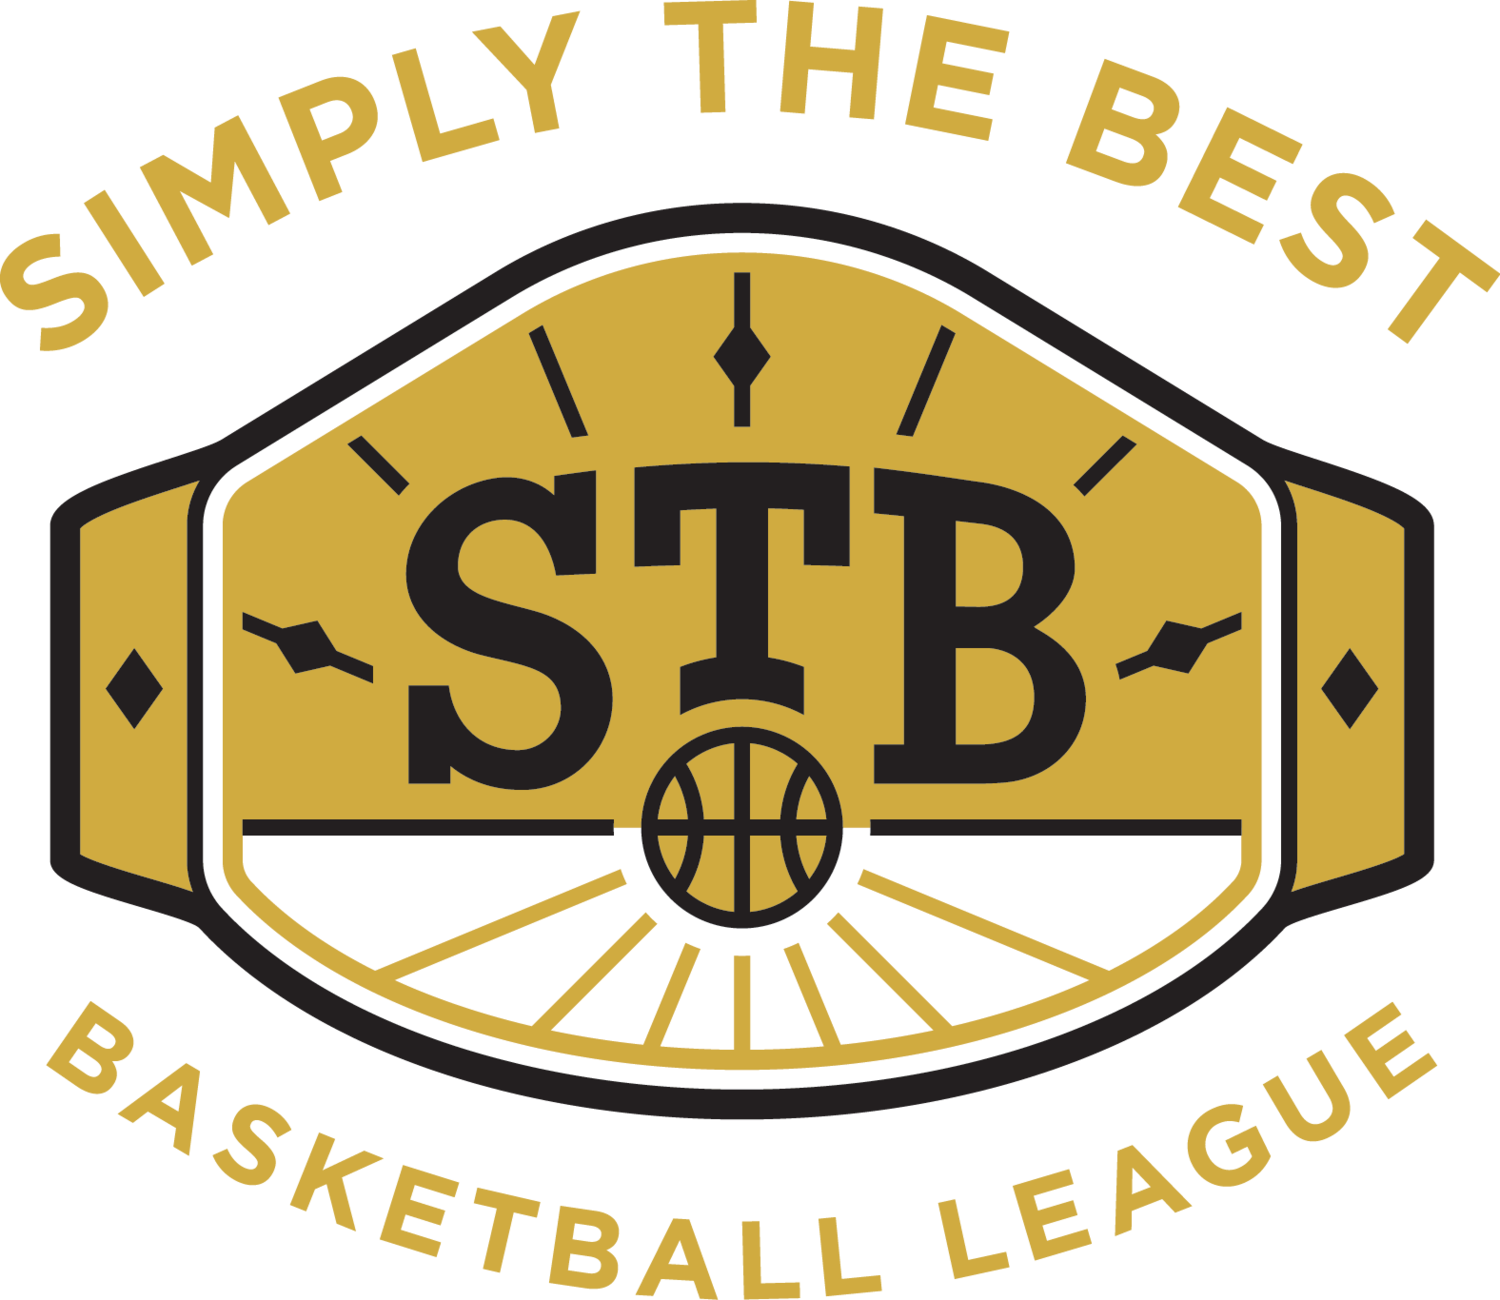 Simply The Best Basketball League